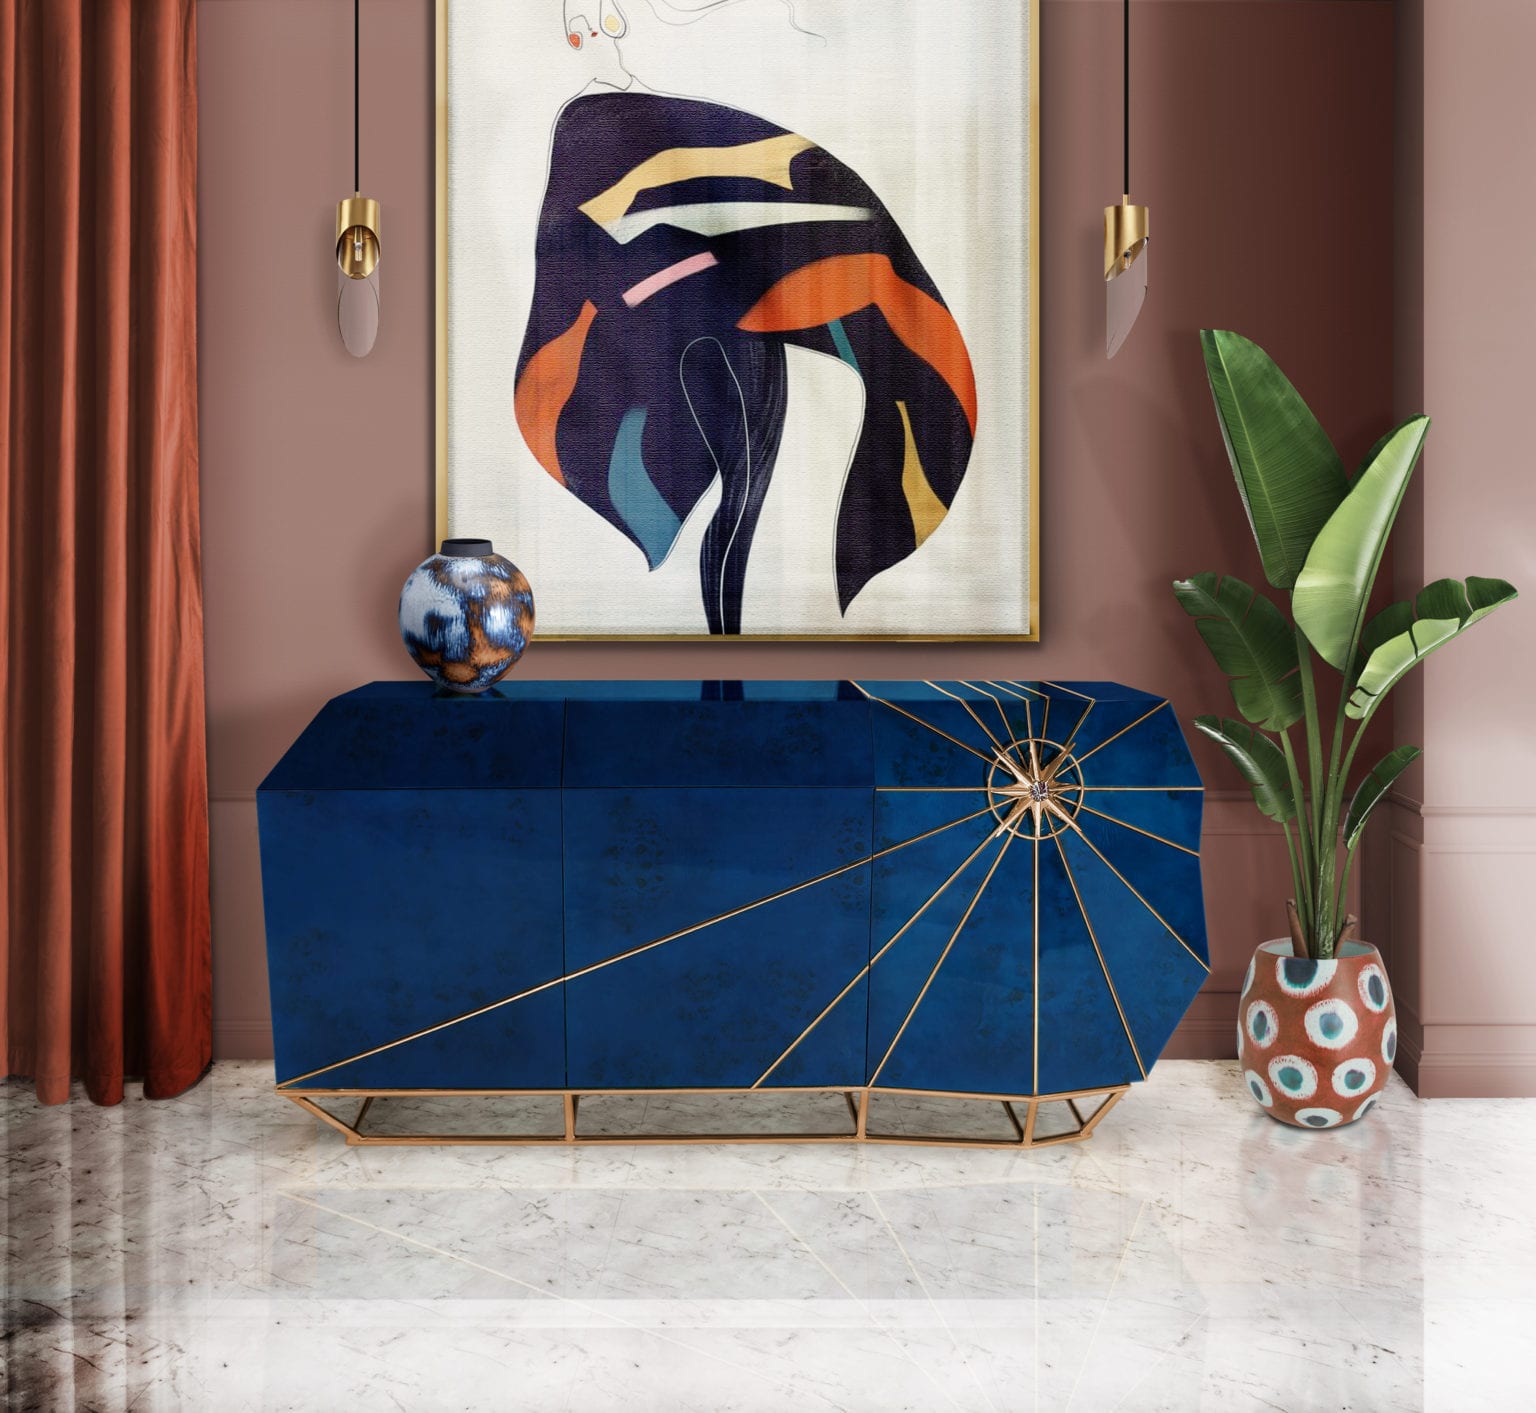 80s Interior Design Trends Keeps Coming Back by Malabar | Artistic